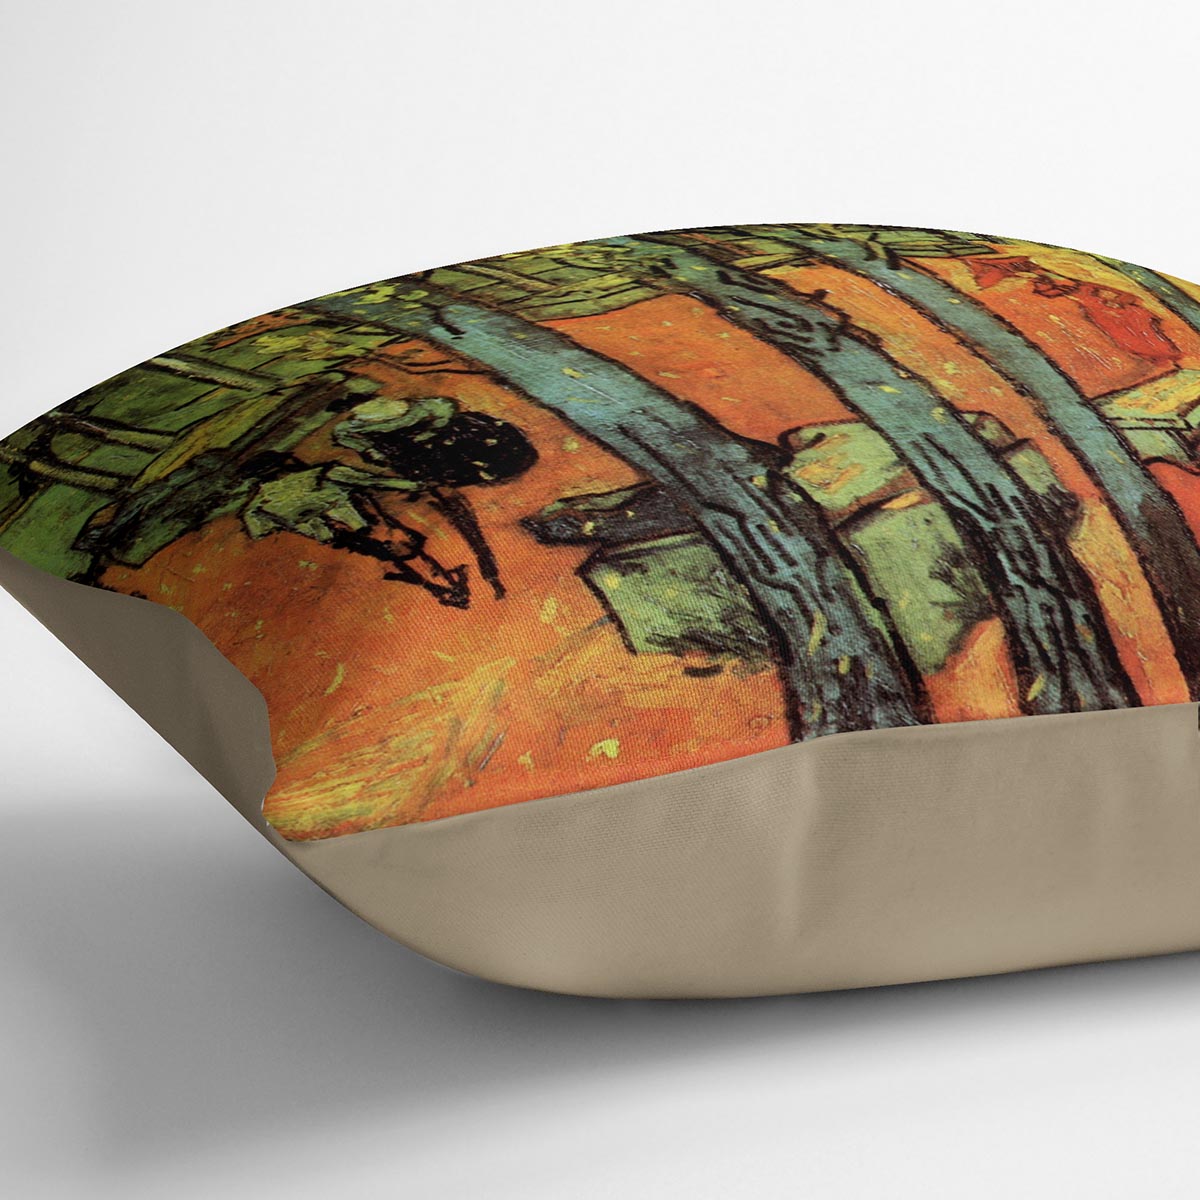 Les Alyscamps Falling Autumn Leaves by Van Gogh Cushion